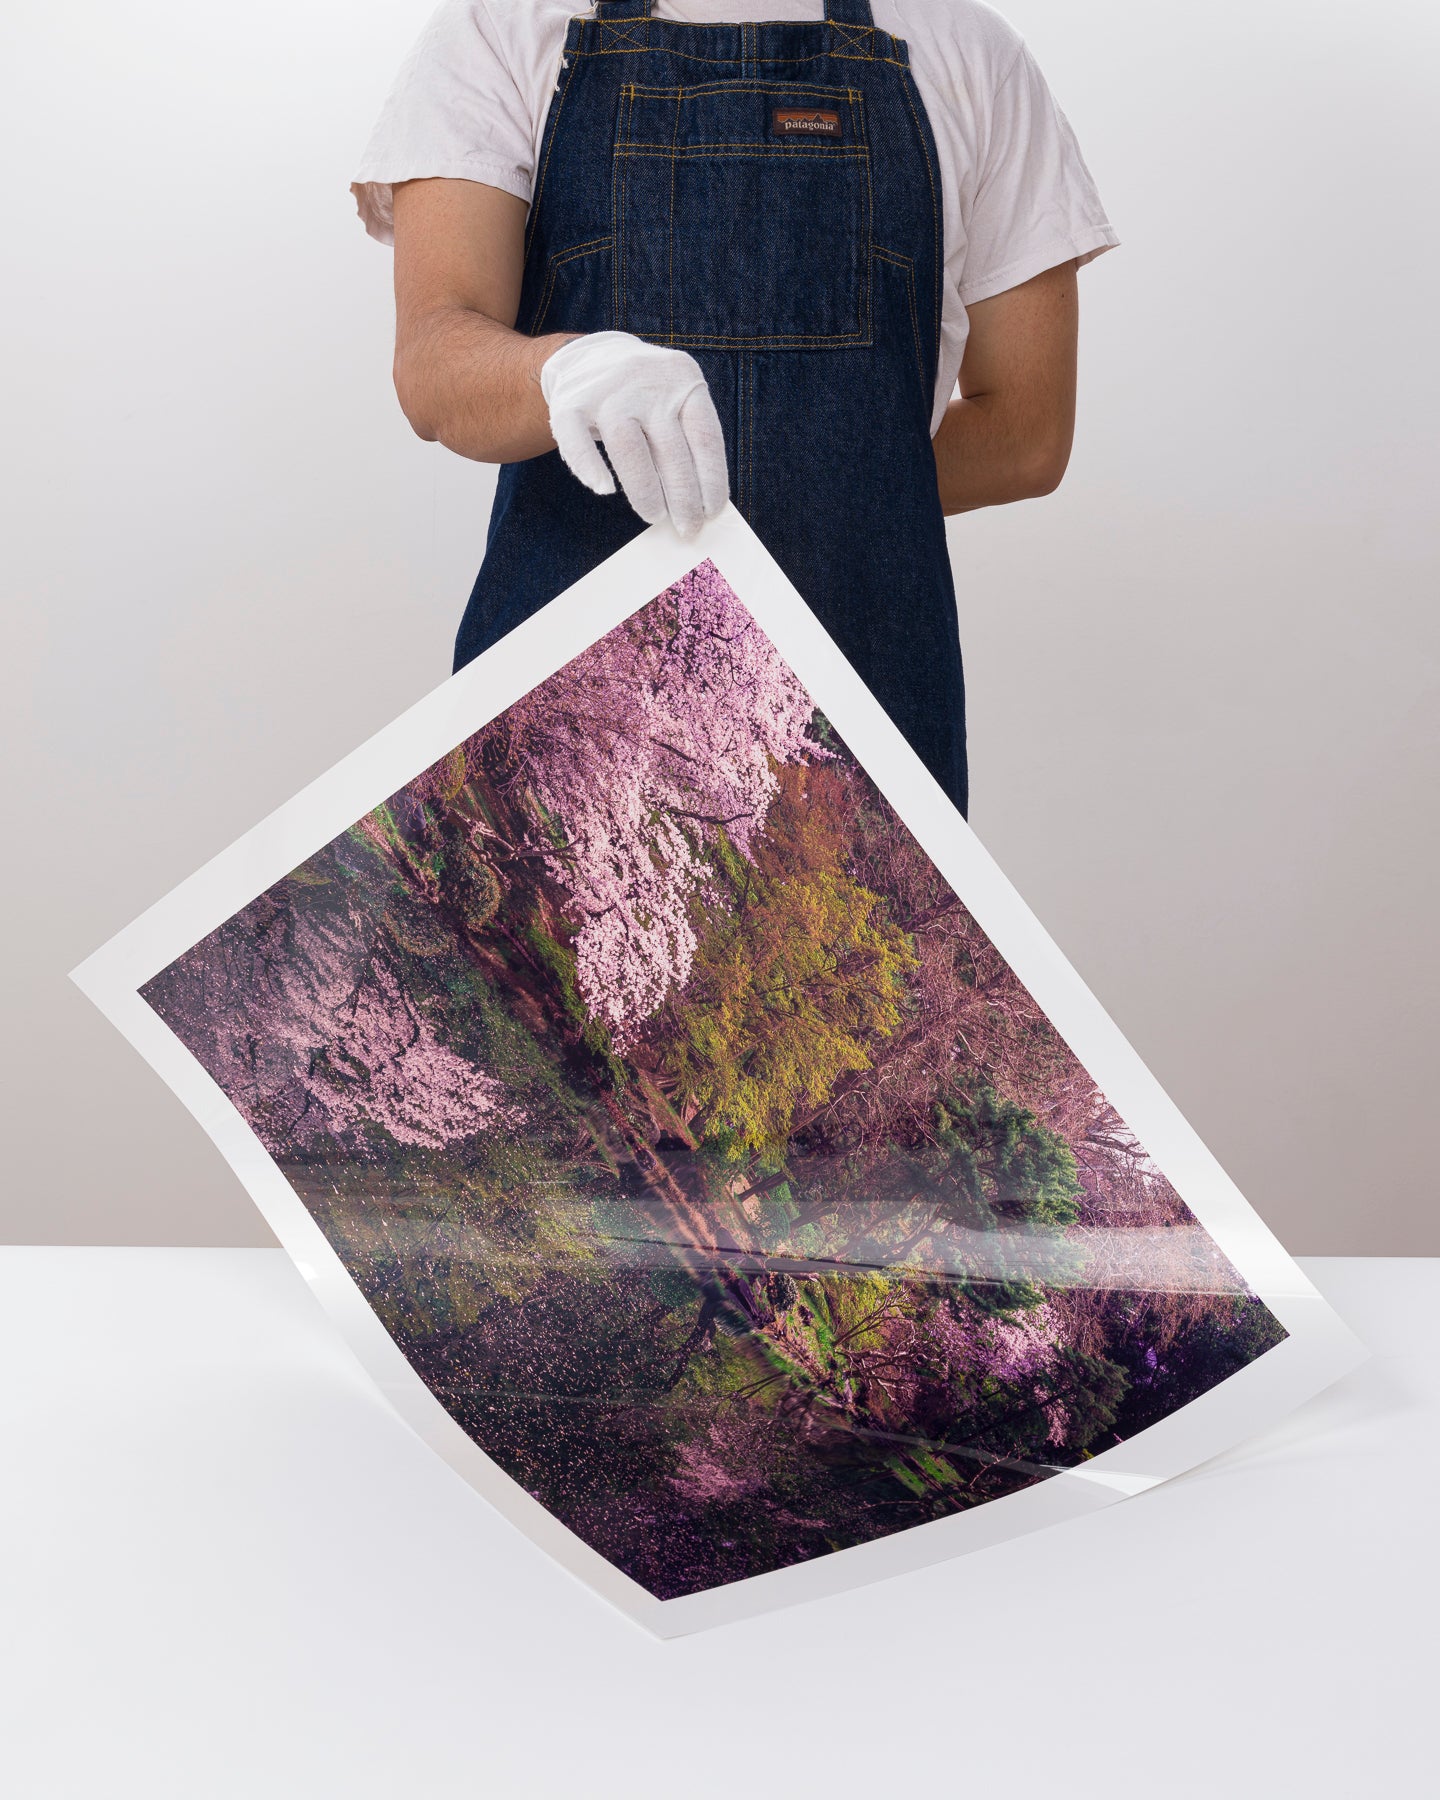 C-Print: Print Photography on Museum Quality, Archival C-Print Papers